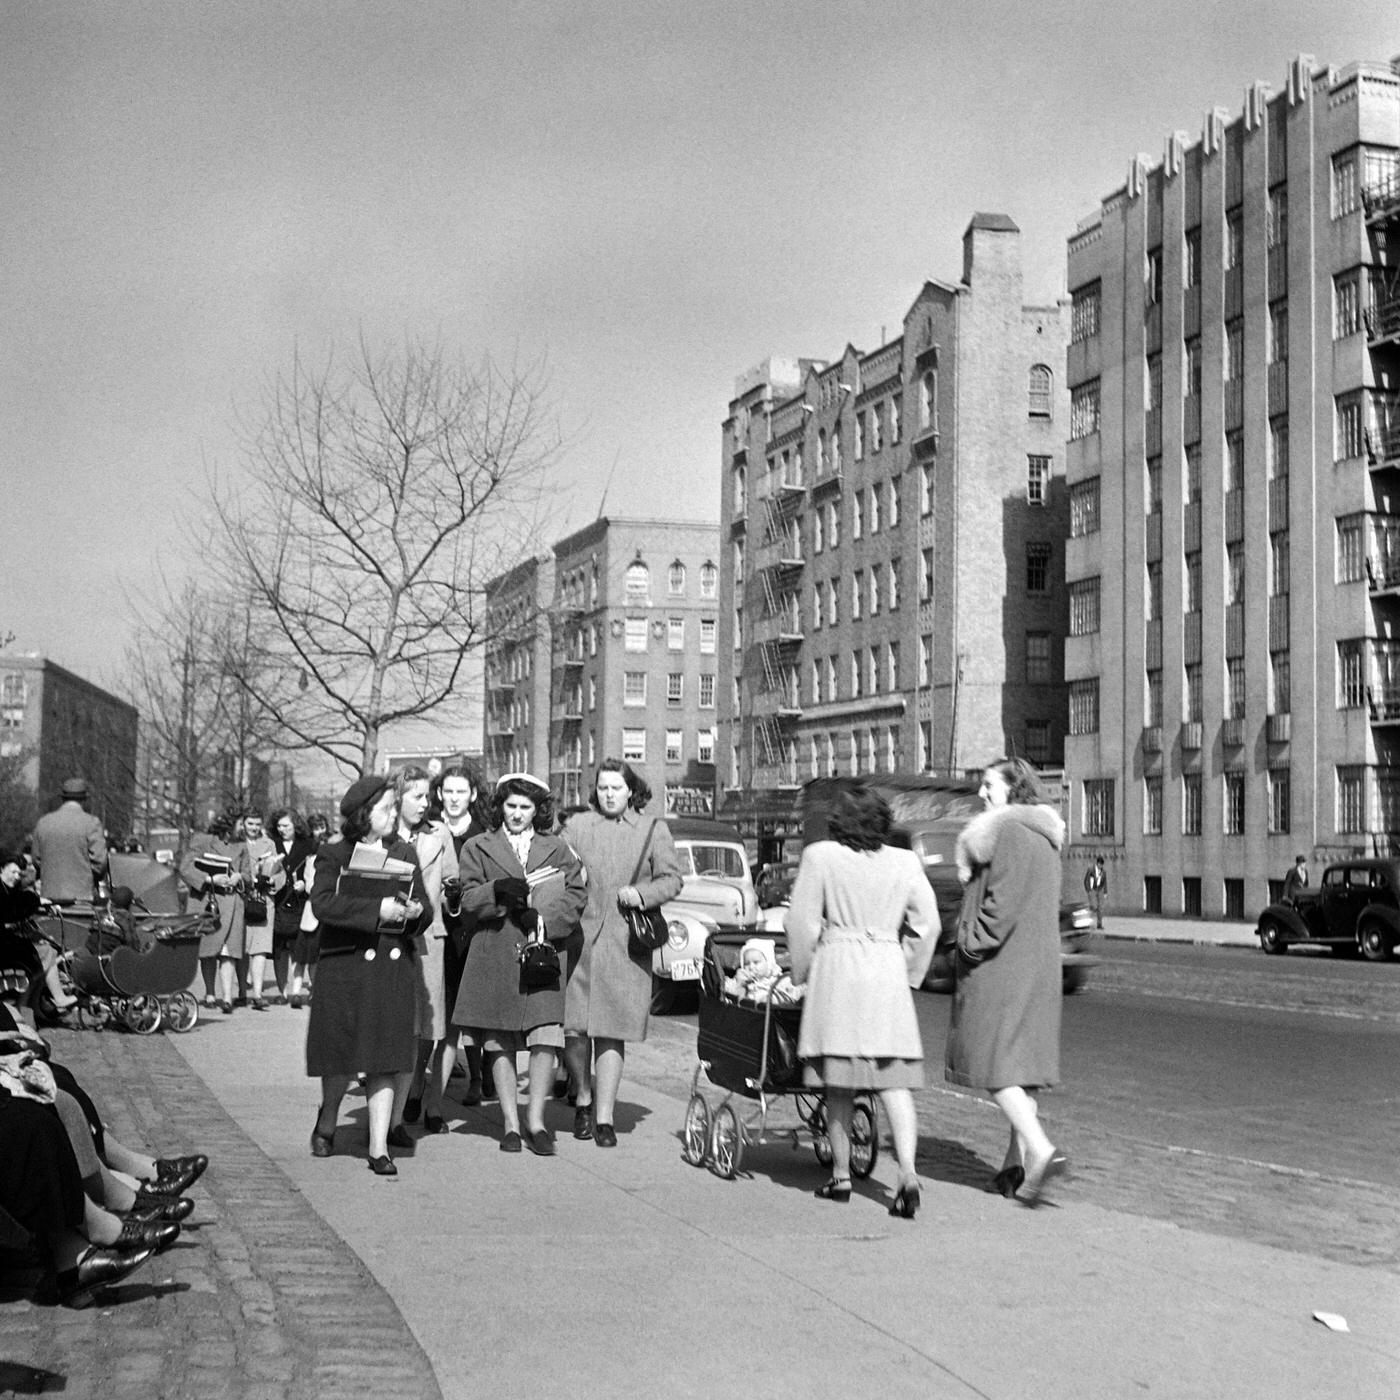 Women With A Baby Carriage Meet Students On A Sidewalk Of Broadway, Manhattan, 1947